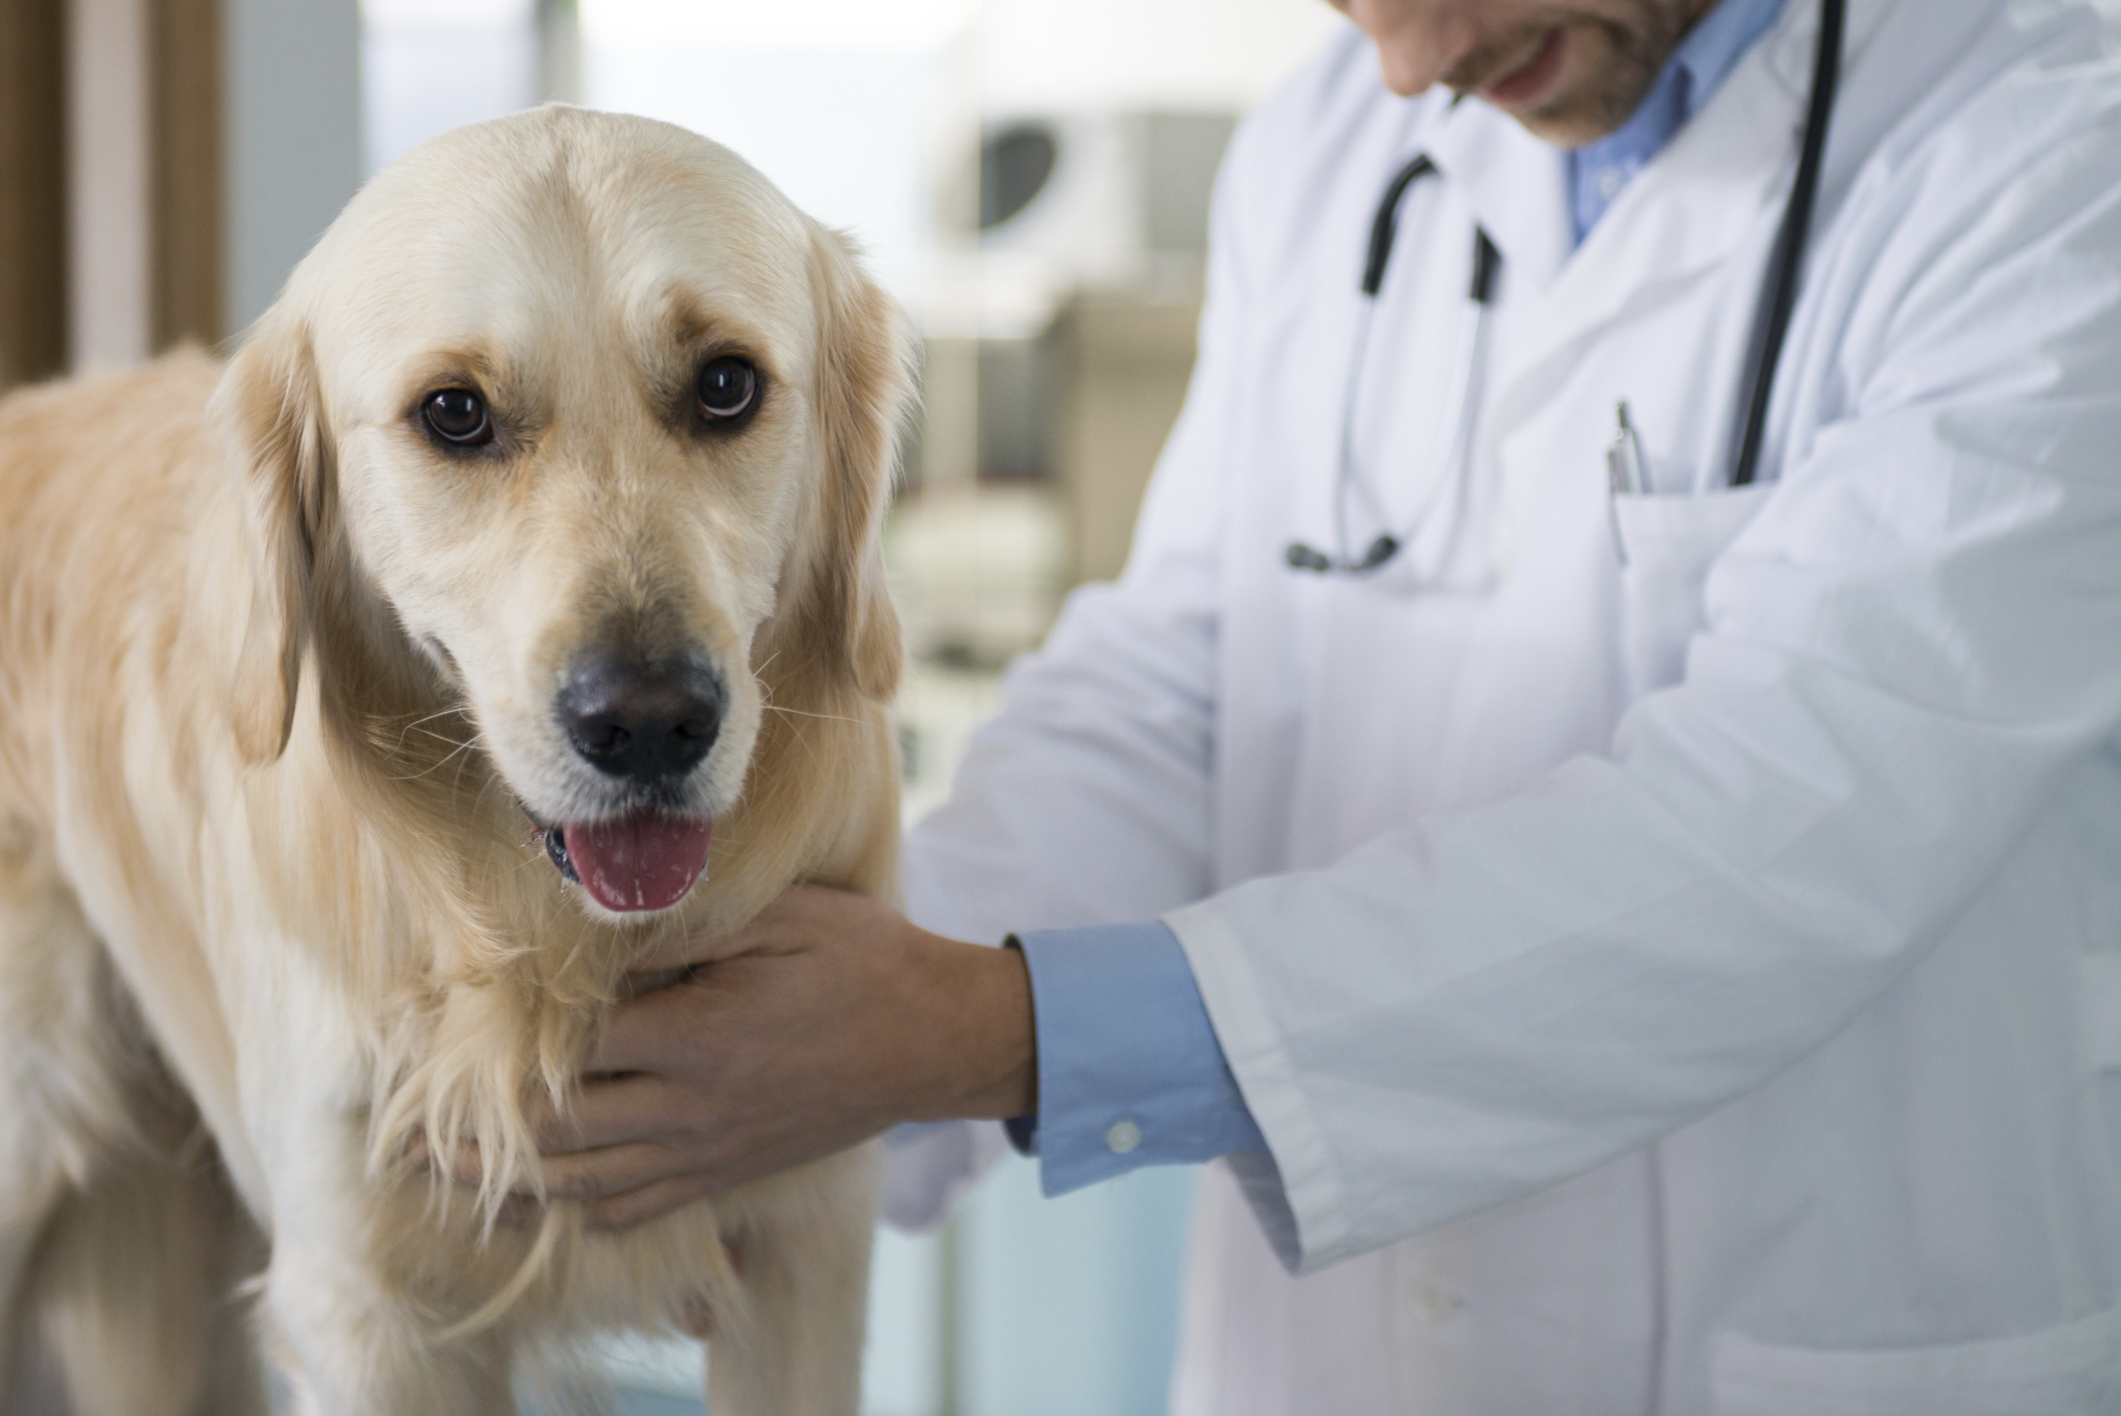 Mobile vets: Choosing at-home euthanasia for your pet